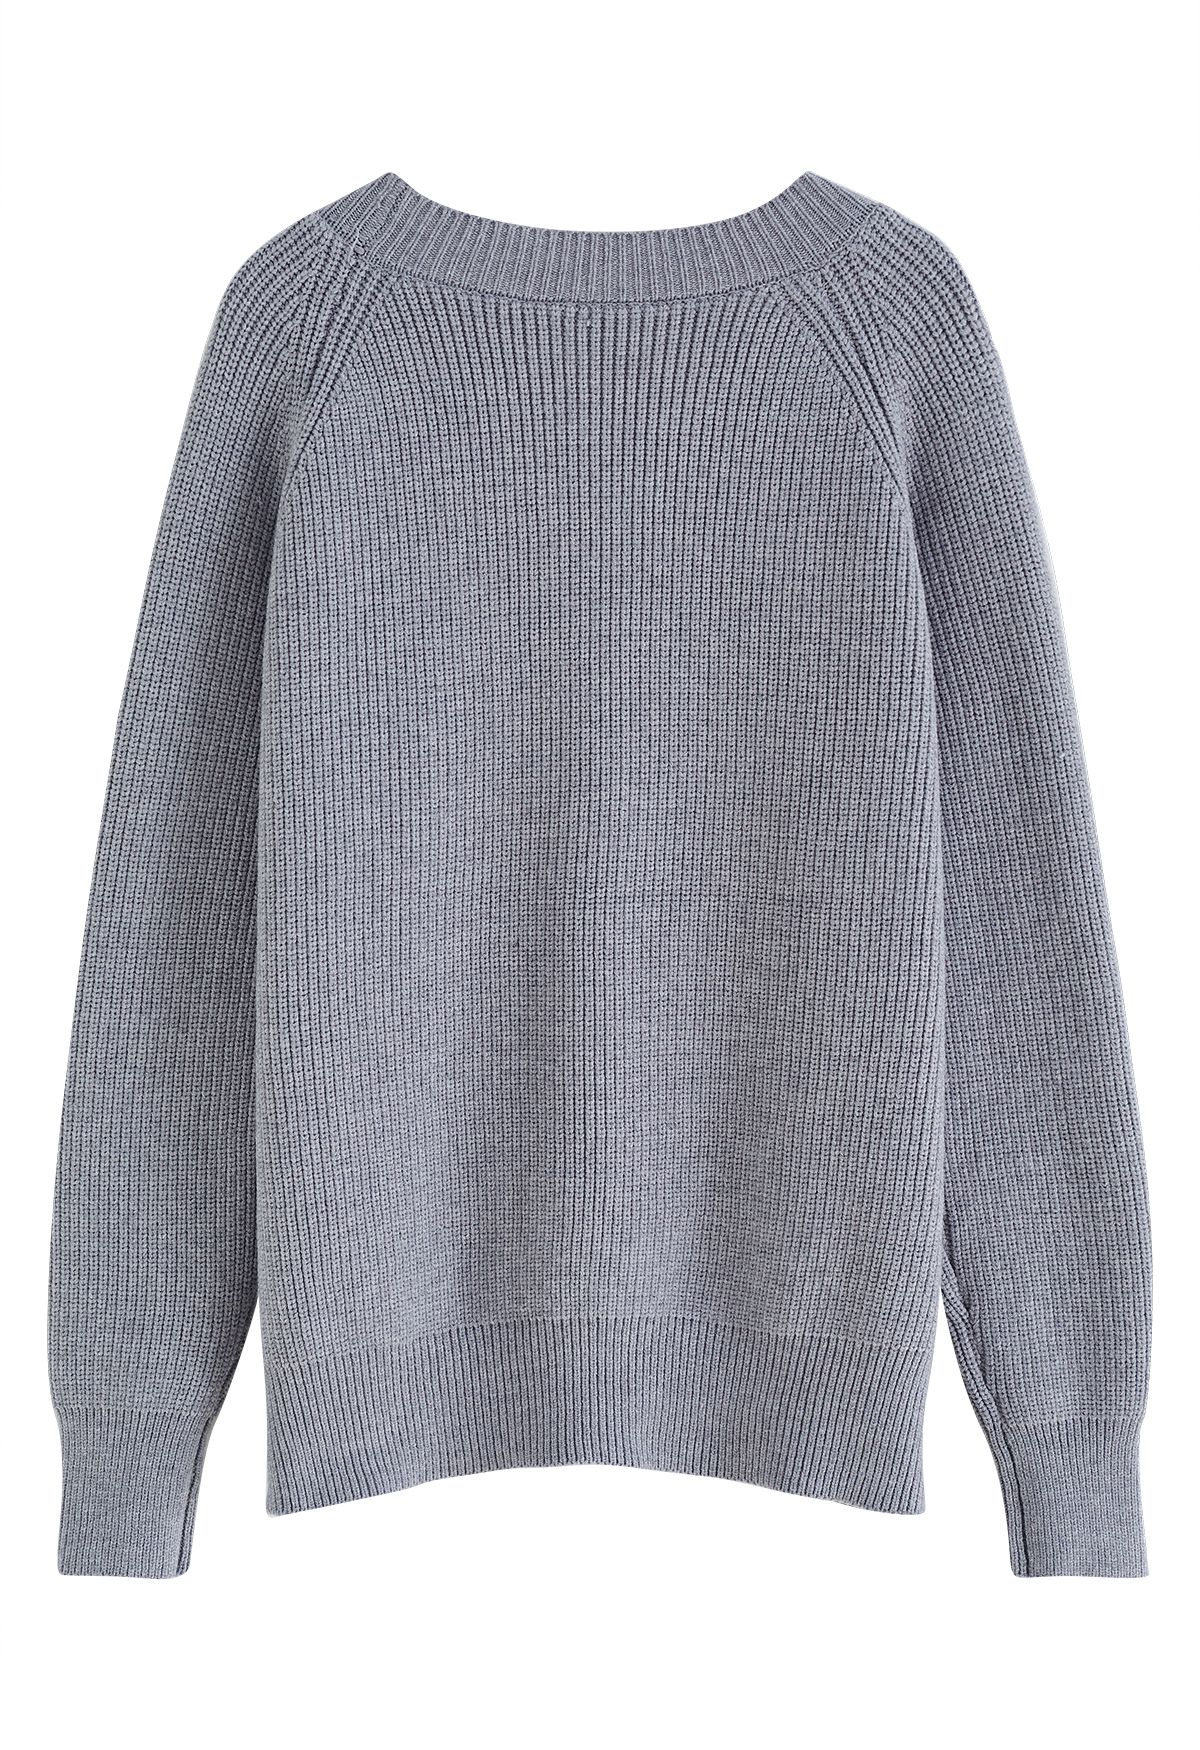 One Heart Rib Knit Oversized Sweater in Grey - Retro, Indie and Unique ...